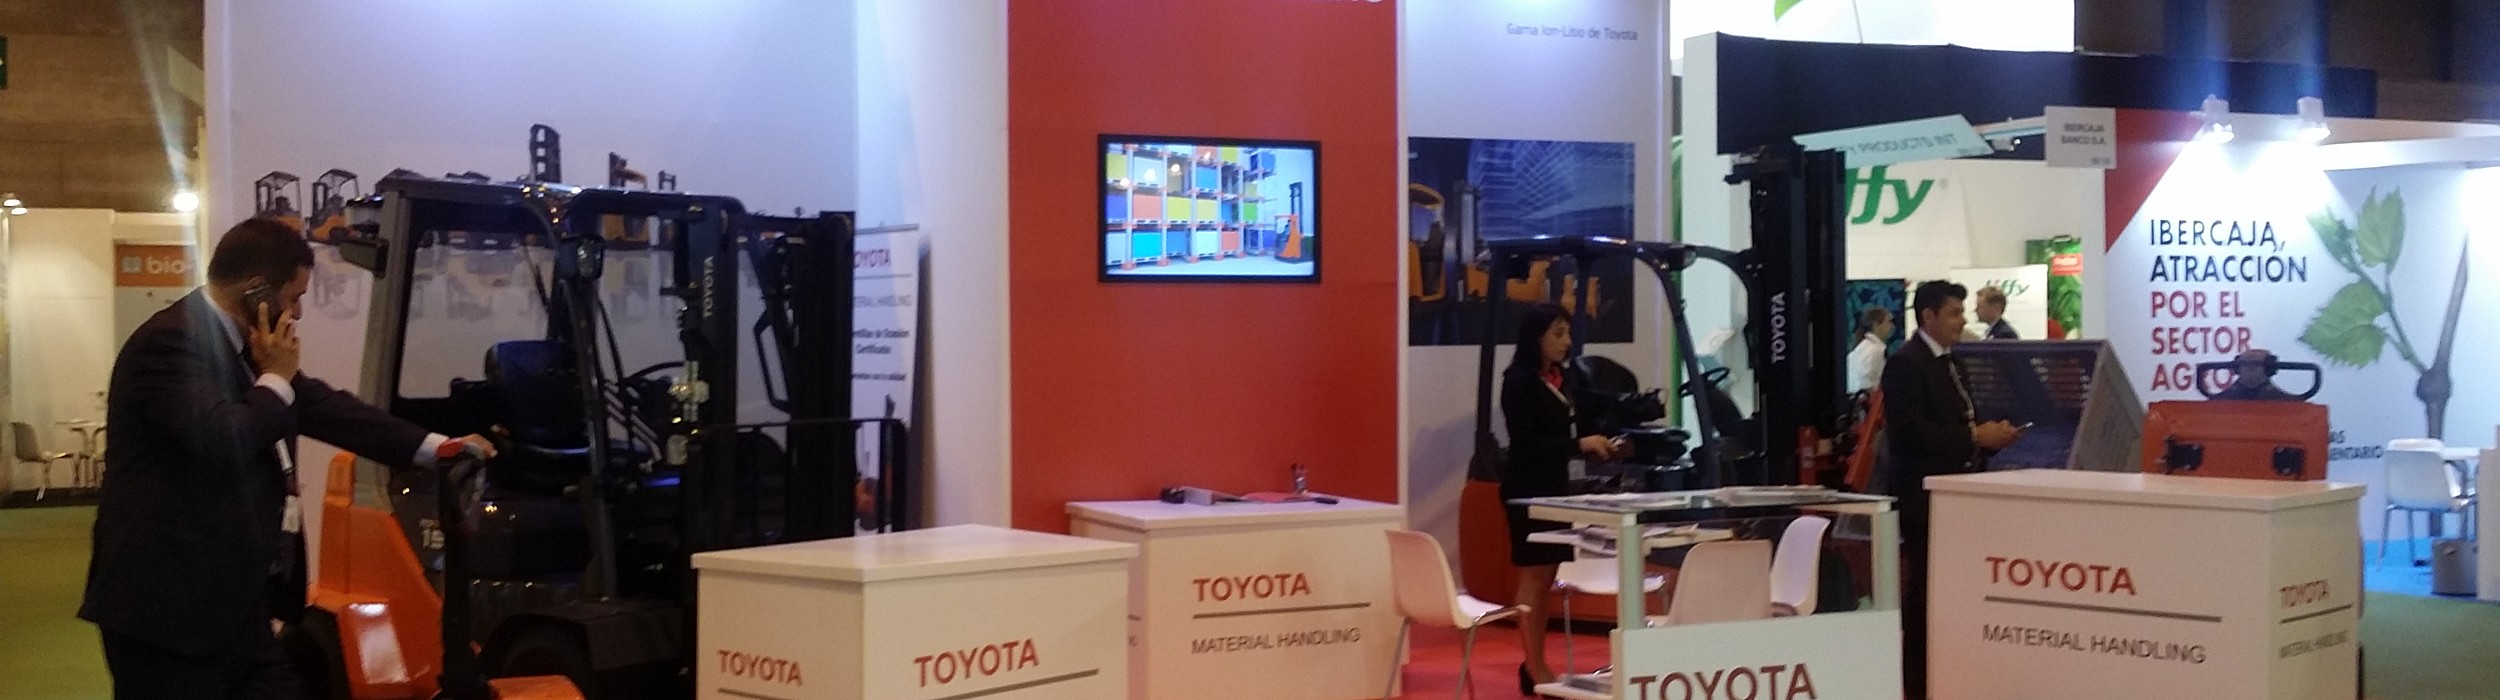 Stand Toyota Material Handling Fruit Attraction 2017